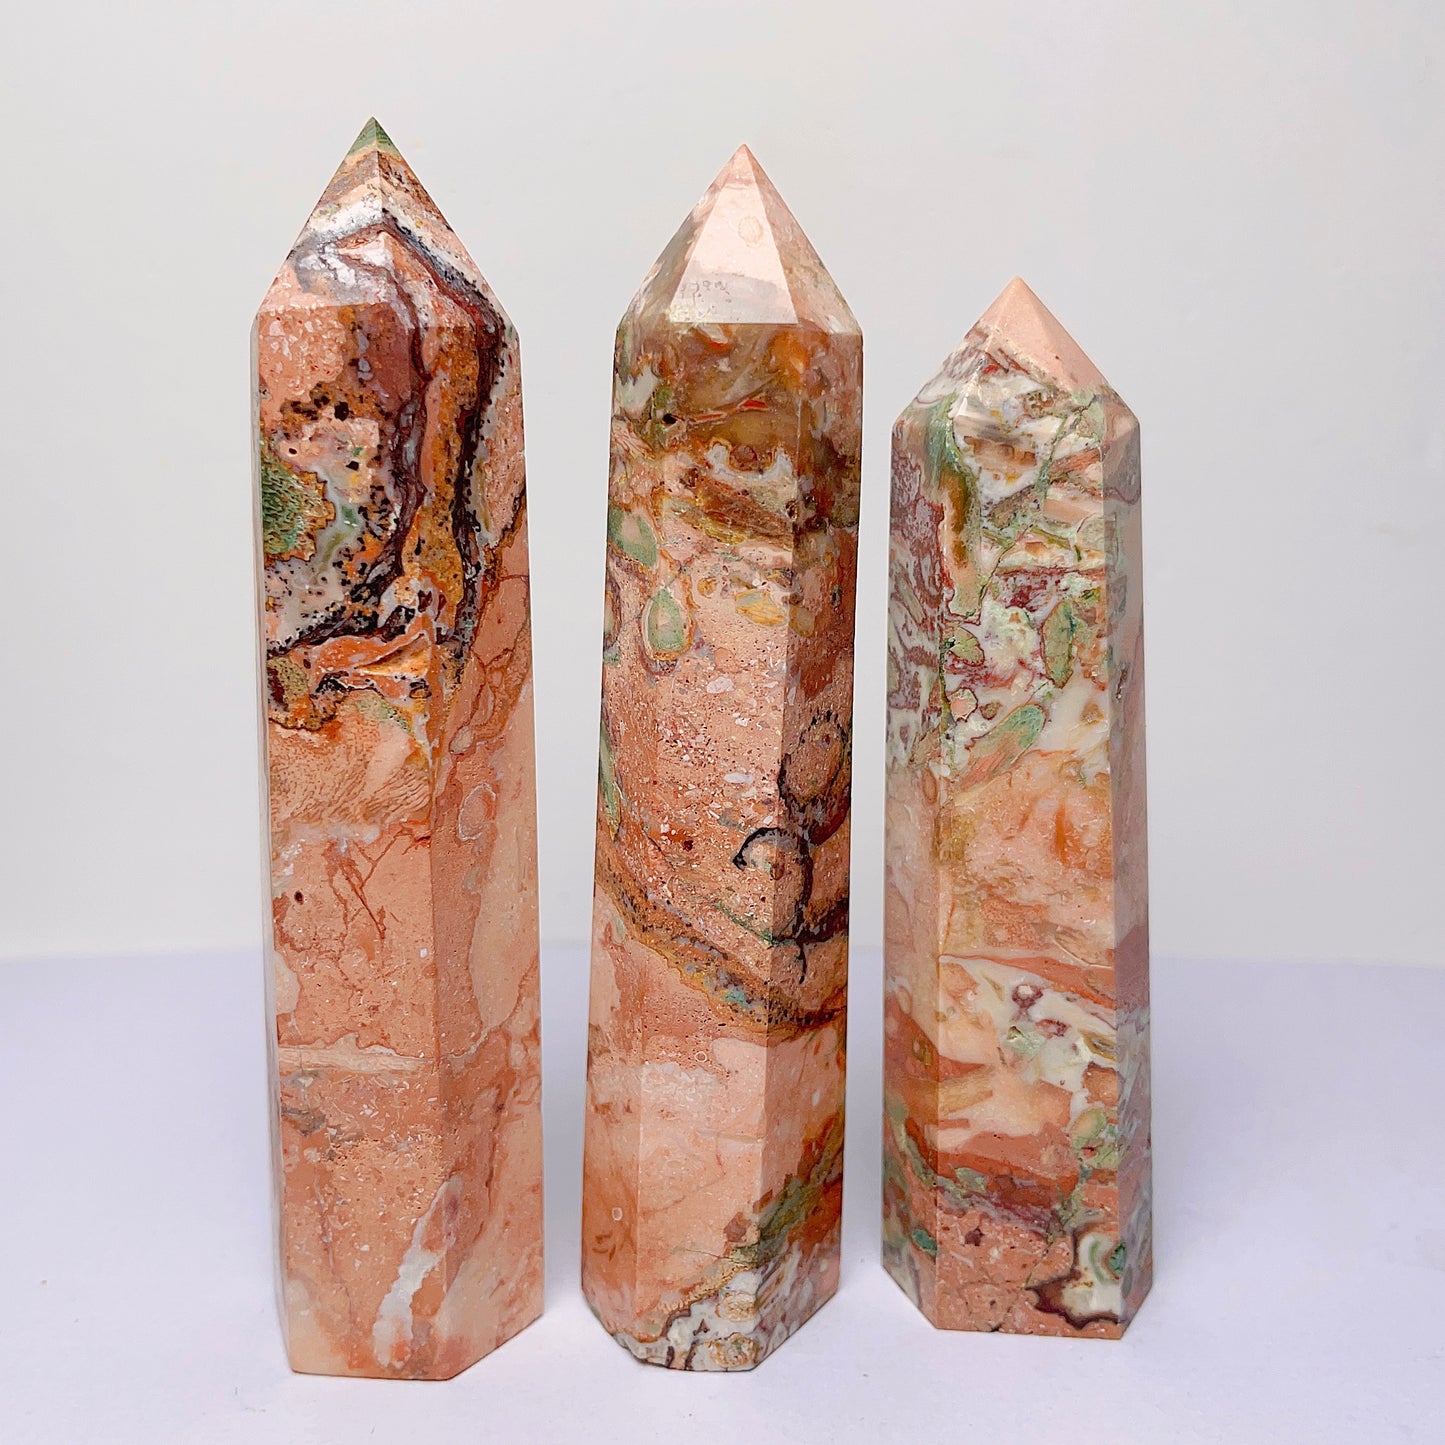 Ombre agate tower/point